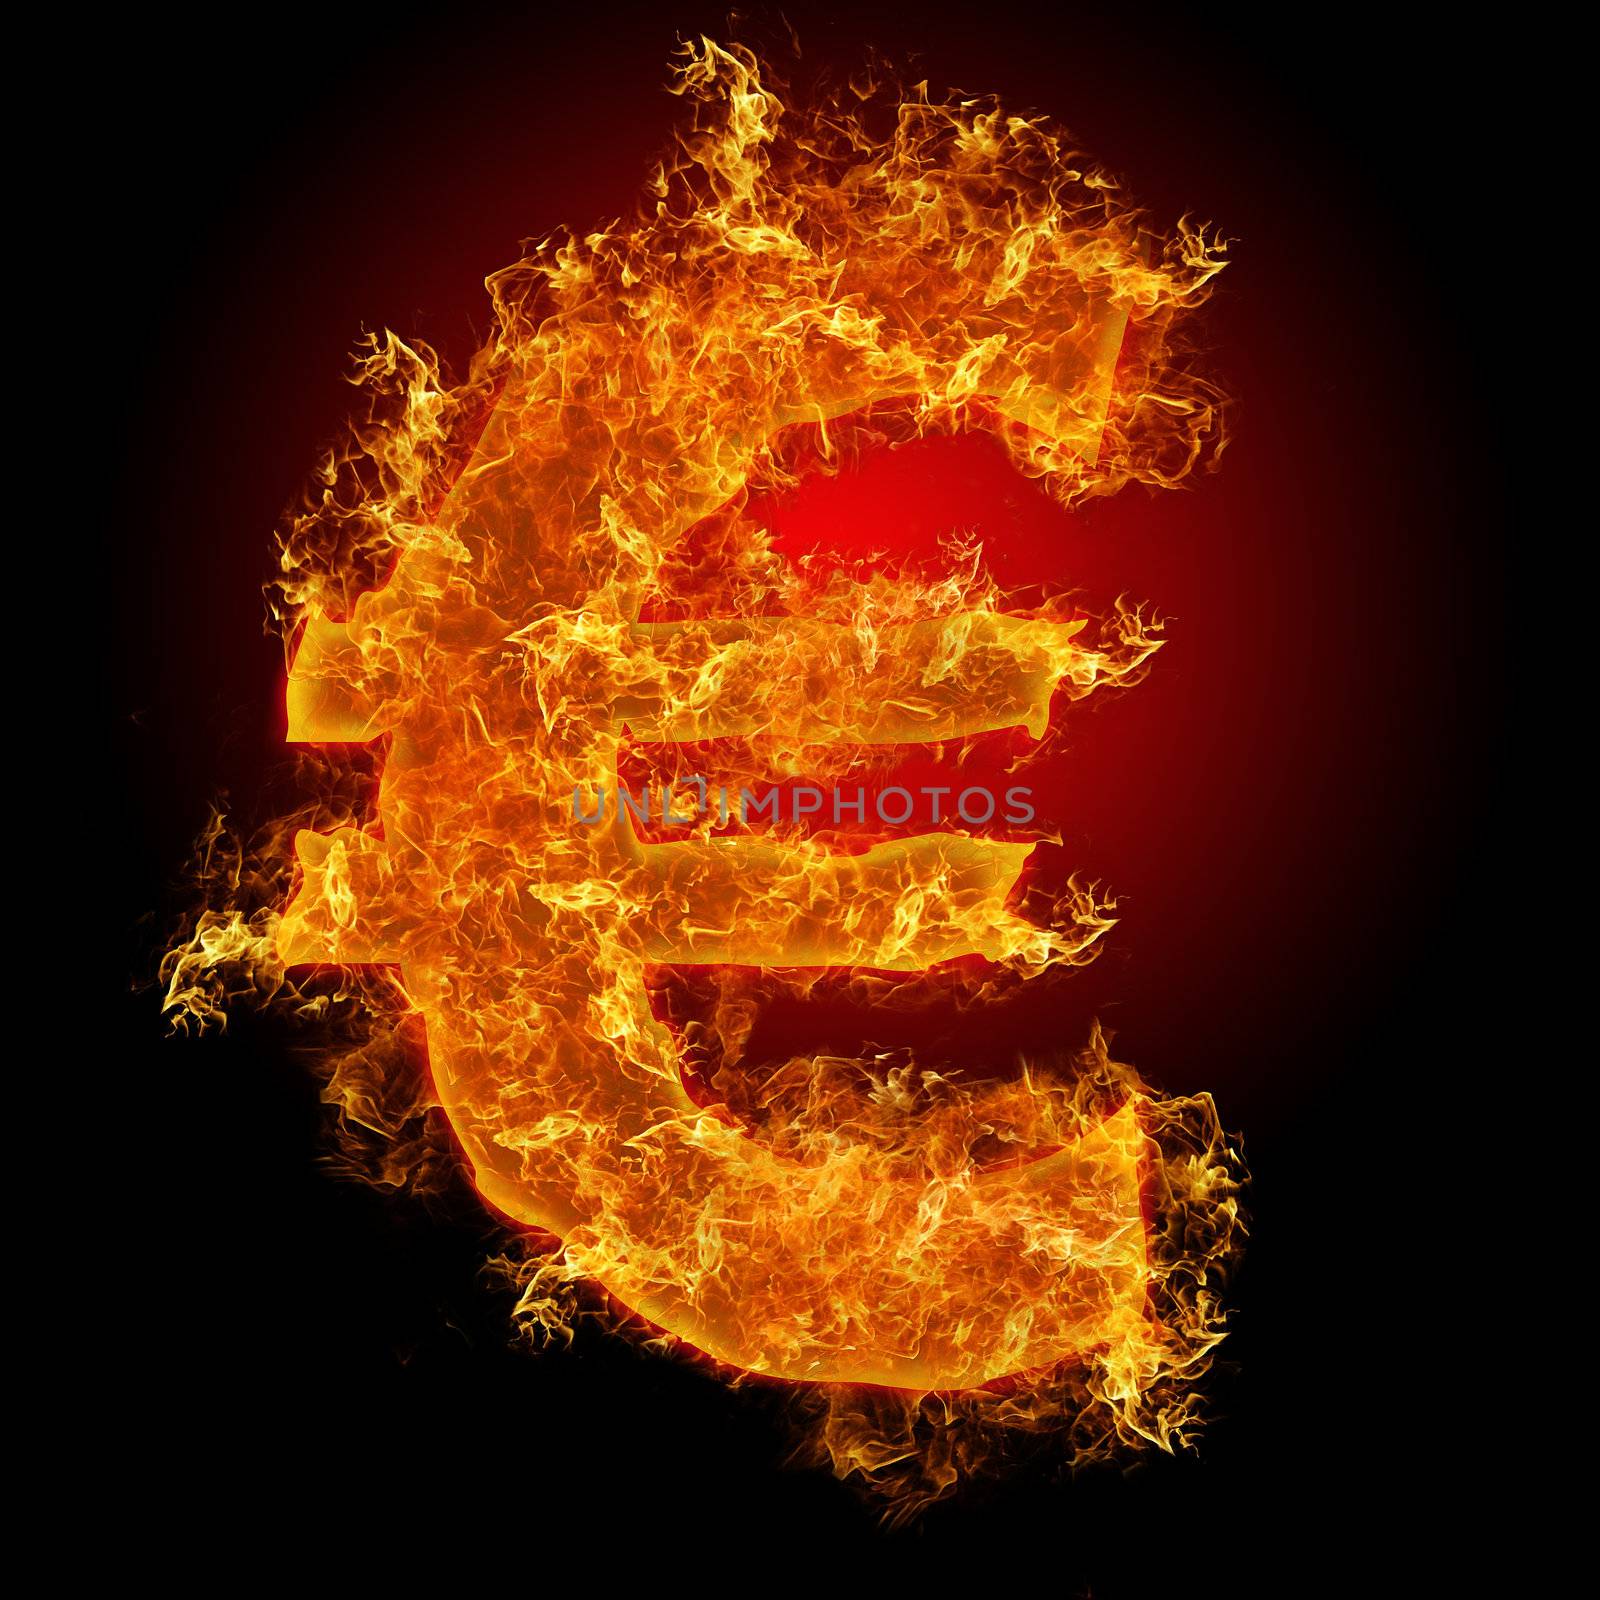 Fire euro sign by rusak